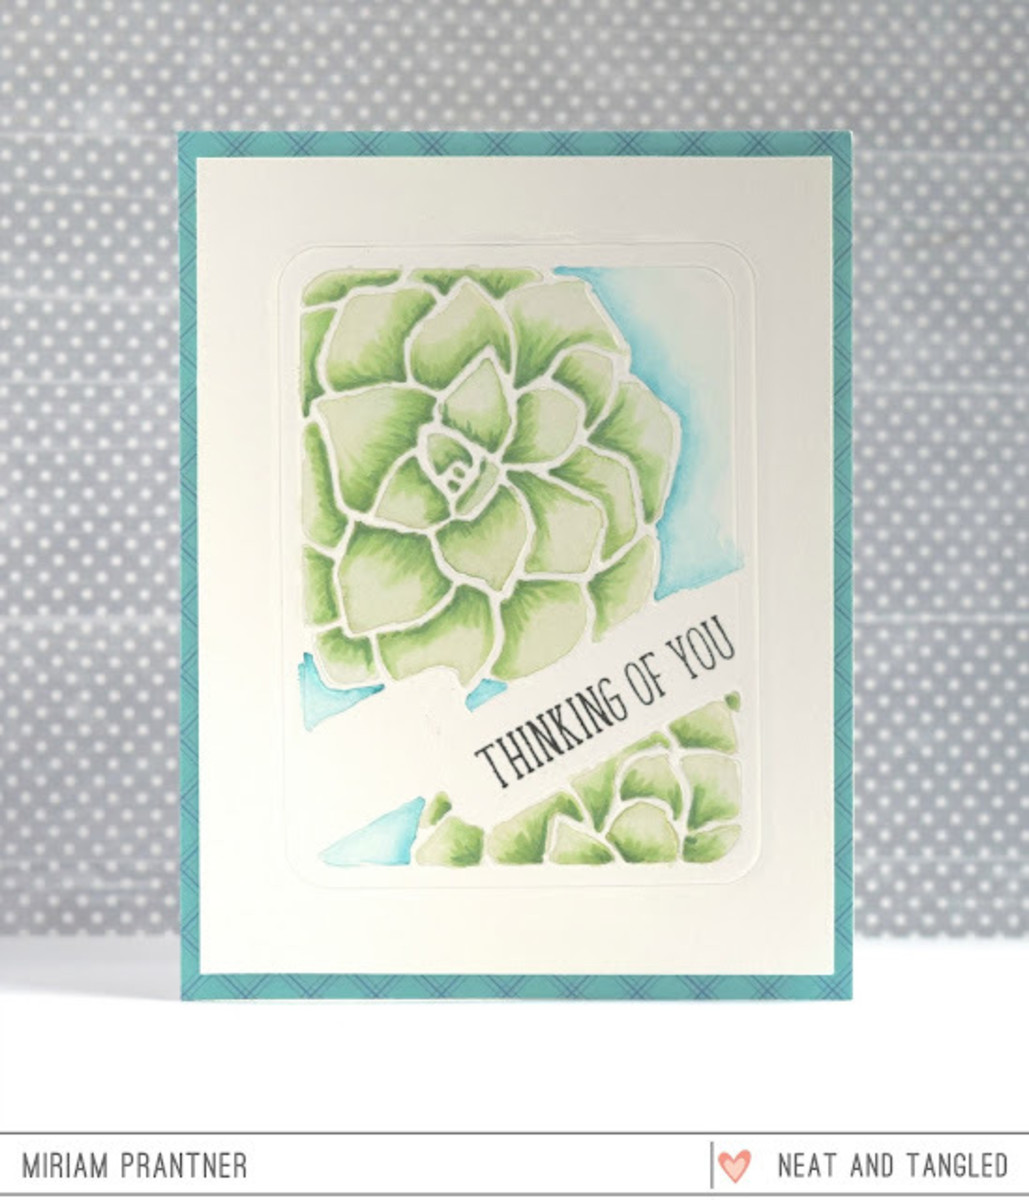 Use watercolors and markers to enhance your dry embossed projects